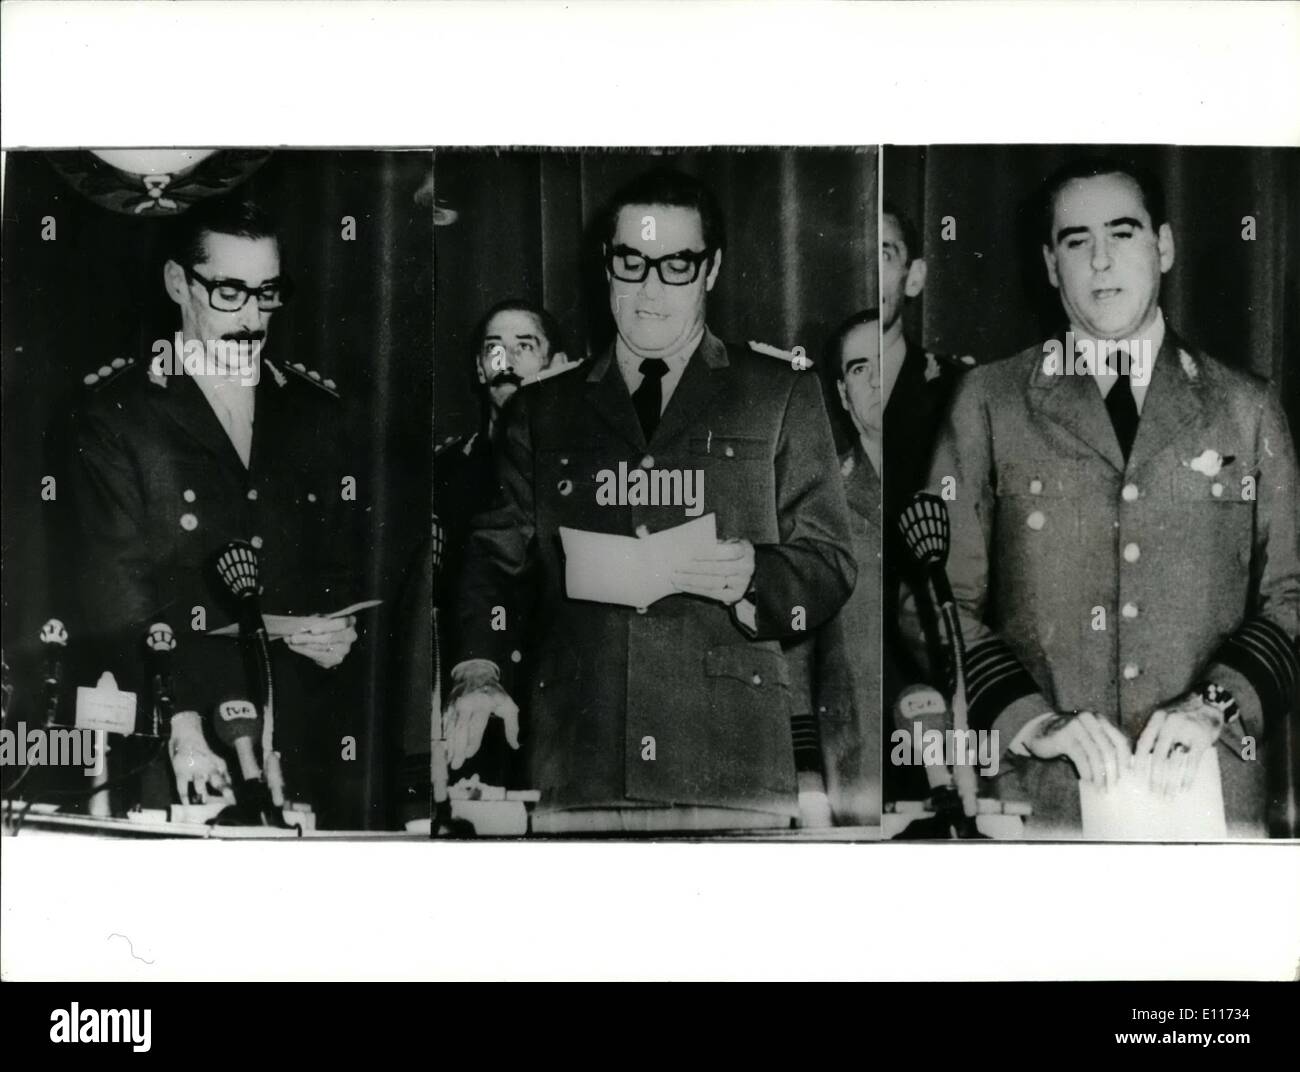 Mar. 03, 1976 - Military takeover in Argentina: Argentina's armed forces in a swift and apparently bloodless coup have everthrone President Maria Estela Peron who is now under house arrest in the mountains of Patagonia. Photo Shows (L to R) Army General Jorge Videla; Admiral Emilio Massera and Air Force Brigadier Orlando Agost, who have been swern in as members of the new military junta. Stock Photo